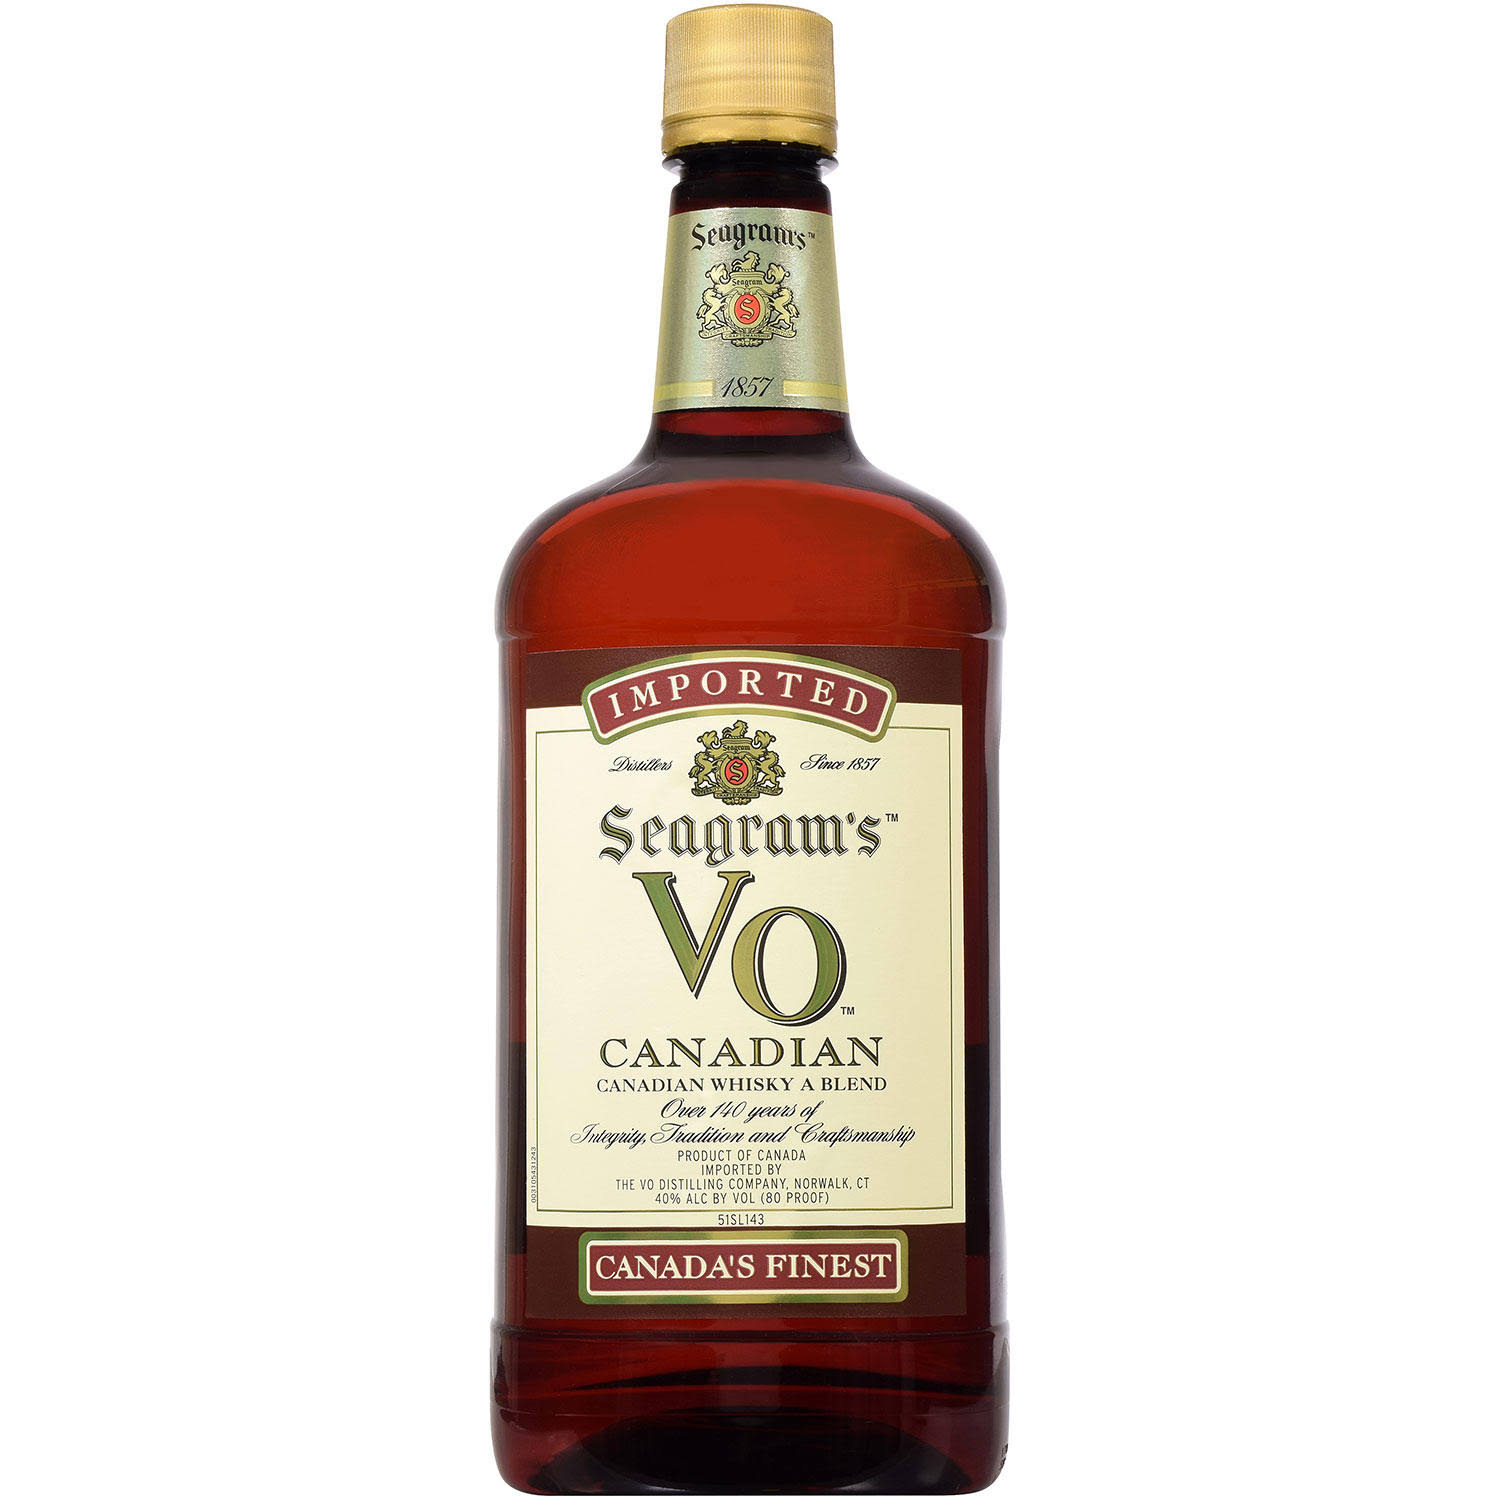 Seagram's Canadian Whisky - 1.75 L